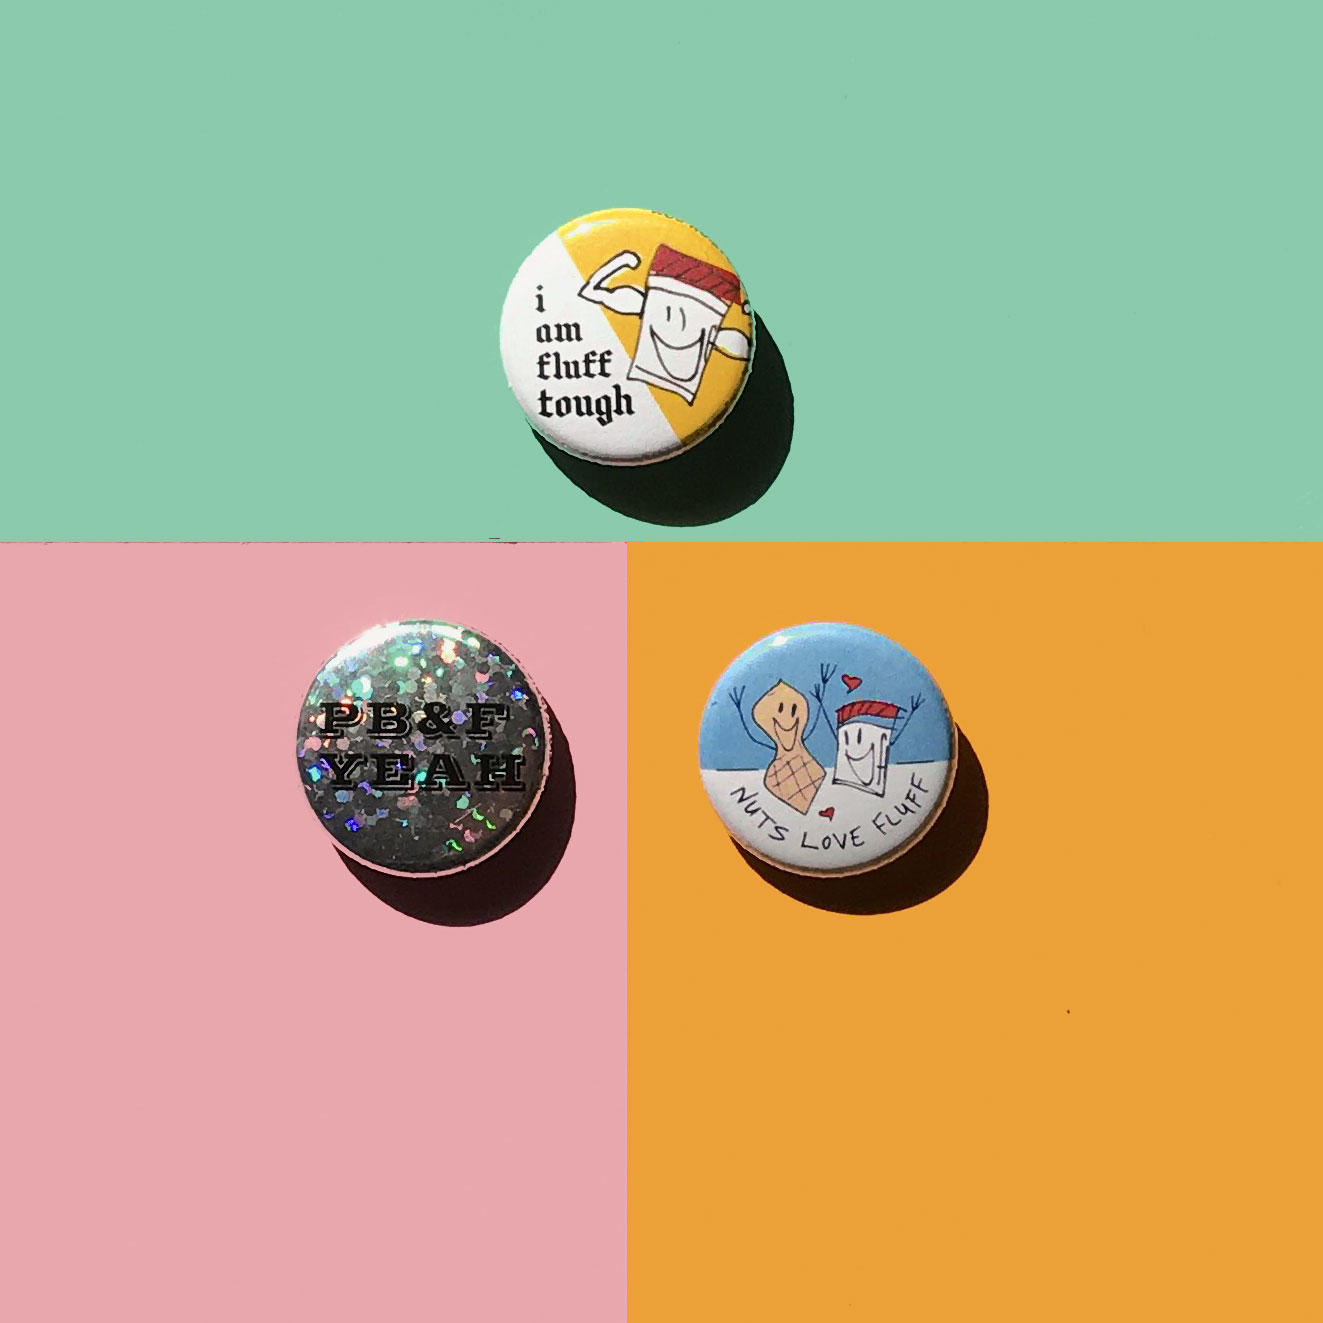 Fluff fan pack of three buttons